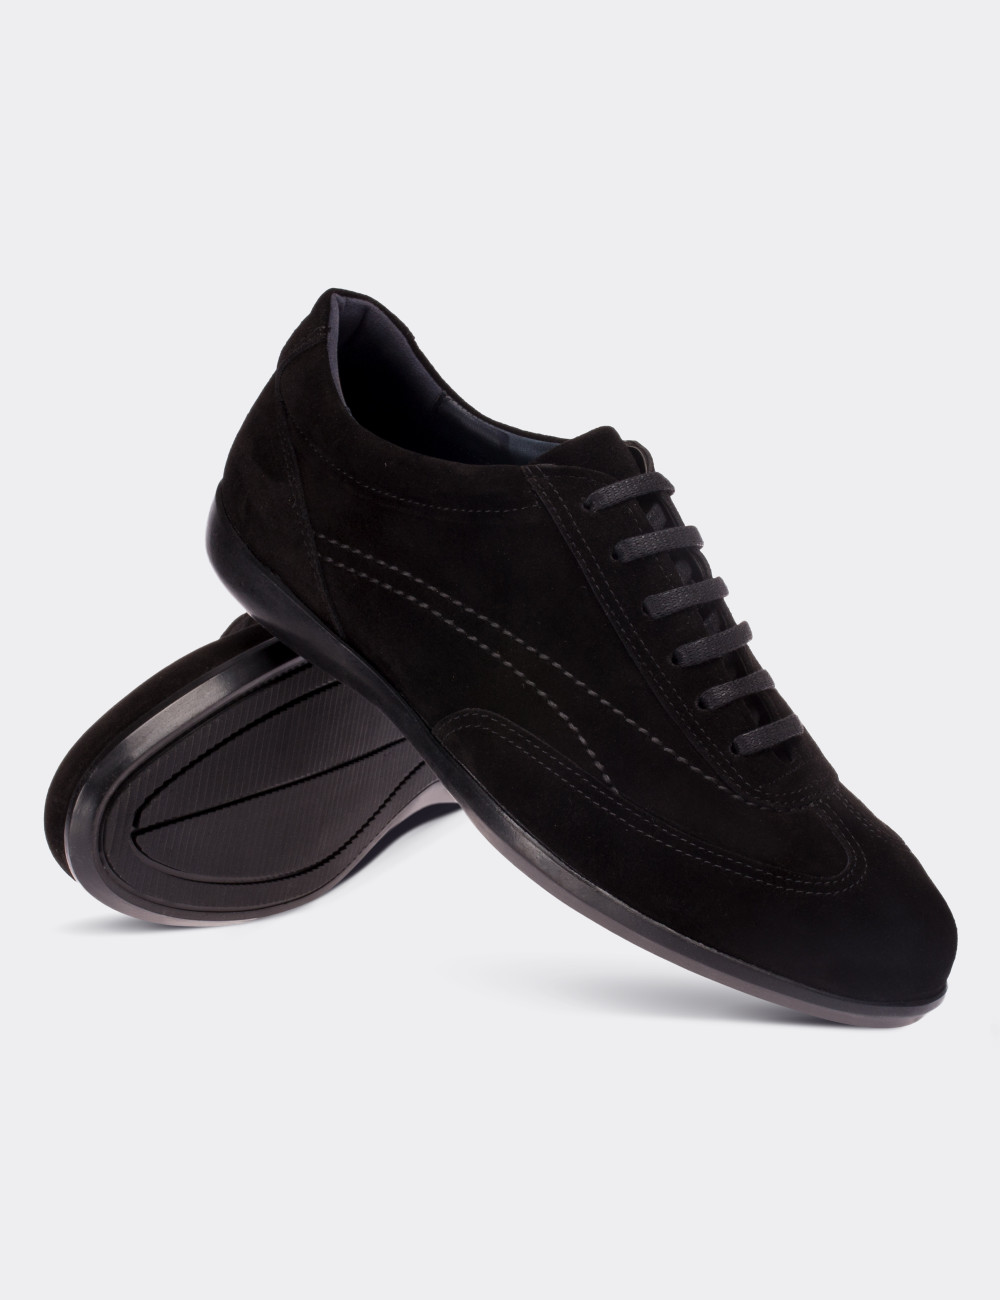 Black Suede Leather Lace-up Shoes - 00321MSYHC06